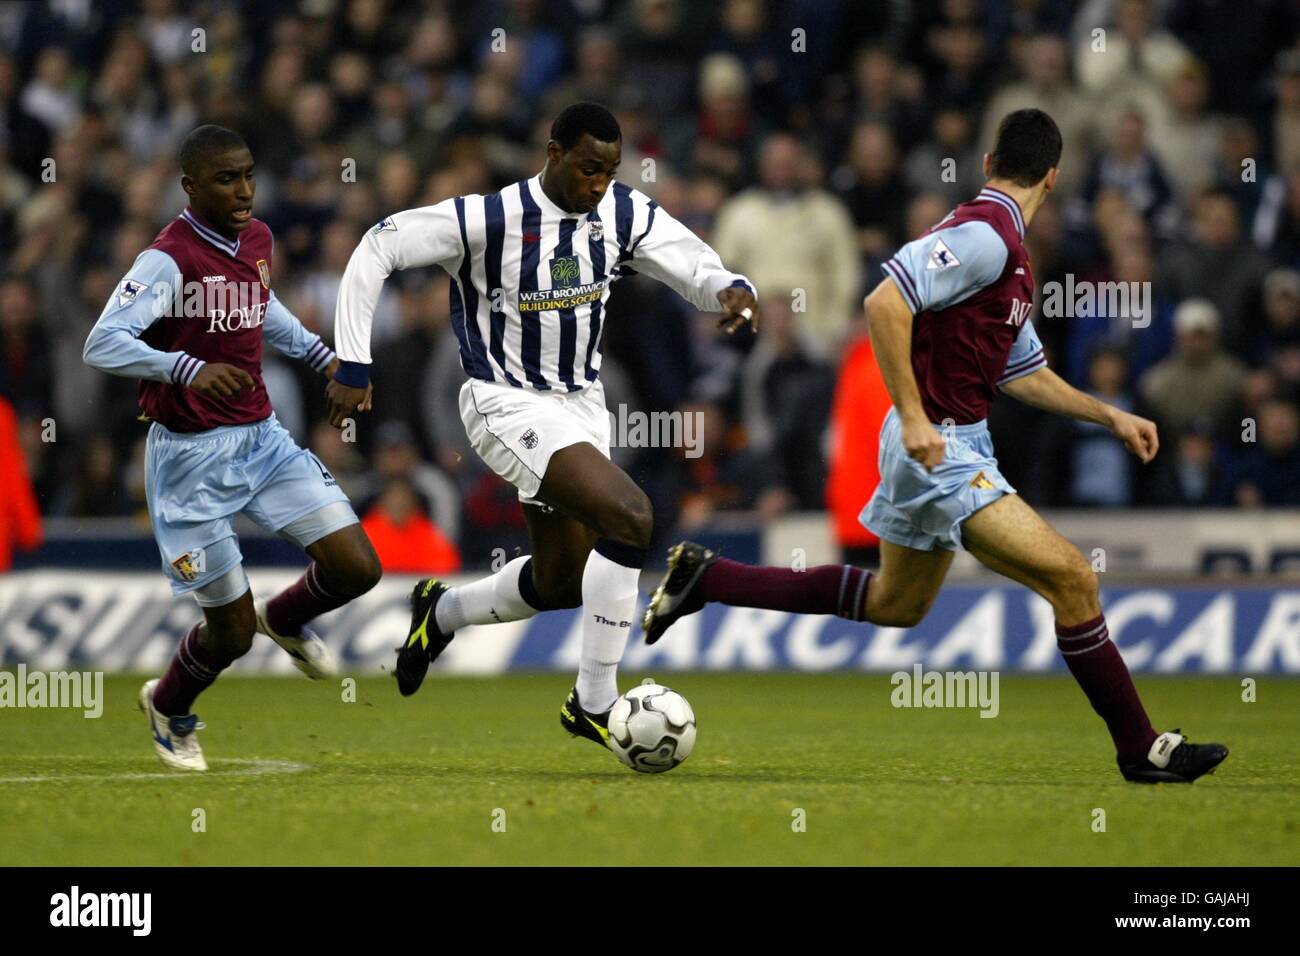 West Bromwich Albion's Jason Roberts (c) tries to find a way between Aston Villa's Jlloyd Samuel (l) and Mark Delaney (r) Stock Photo